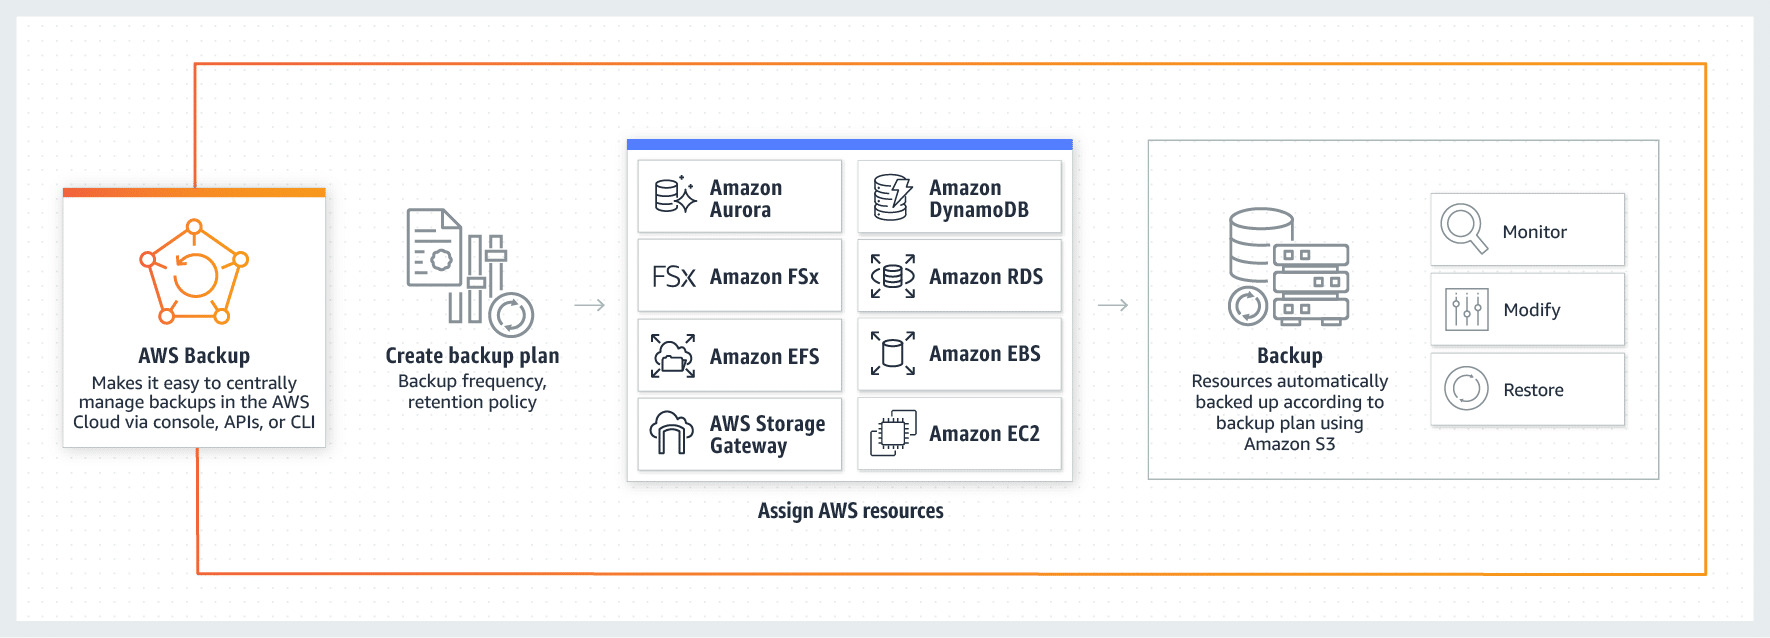 AWS Backup Resource Center - Diagram of how AWS Backup works by AWS